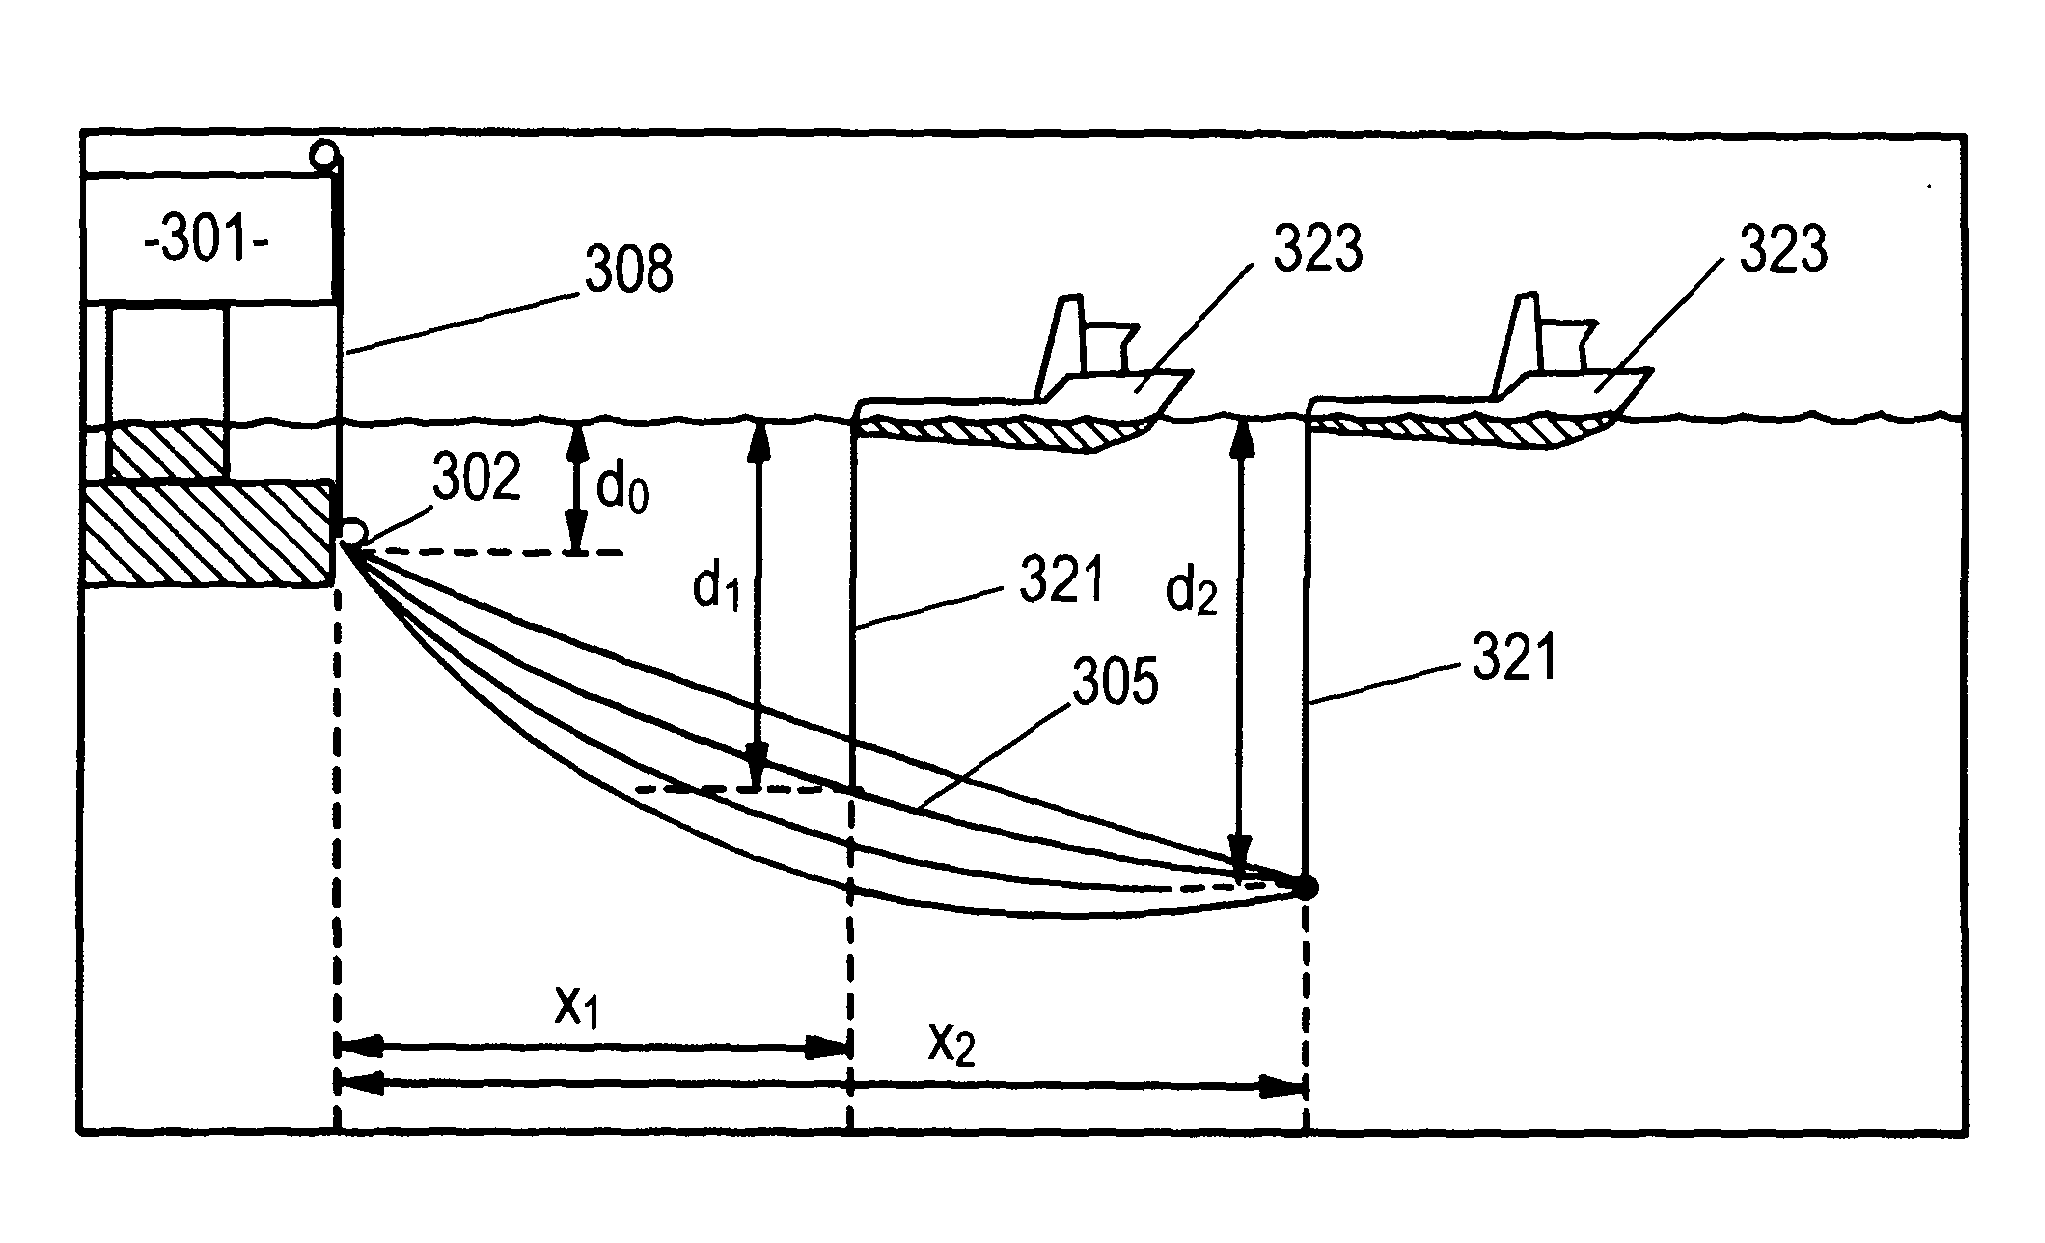 Method of determining the tension in a mooring line